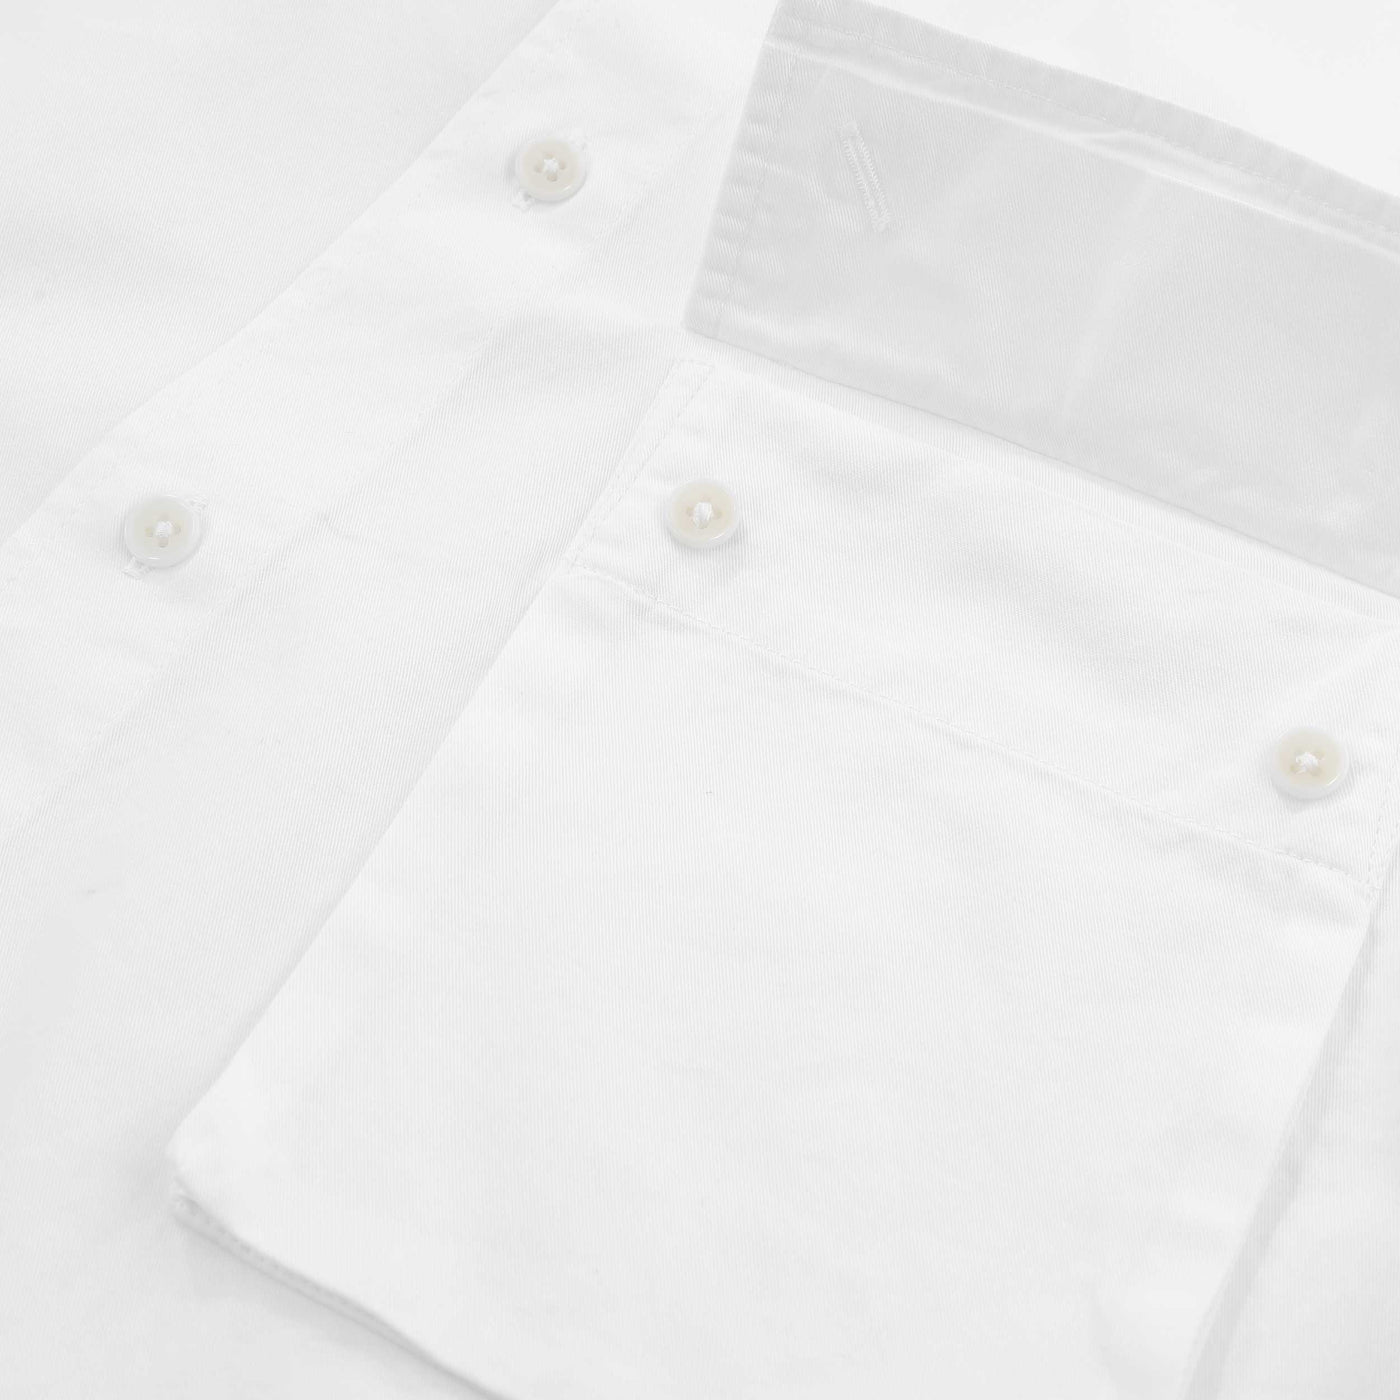 Belstaff Scale SS Shirt in White Pocket